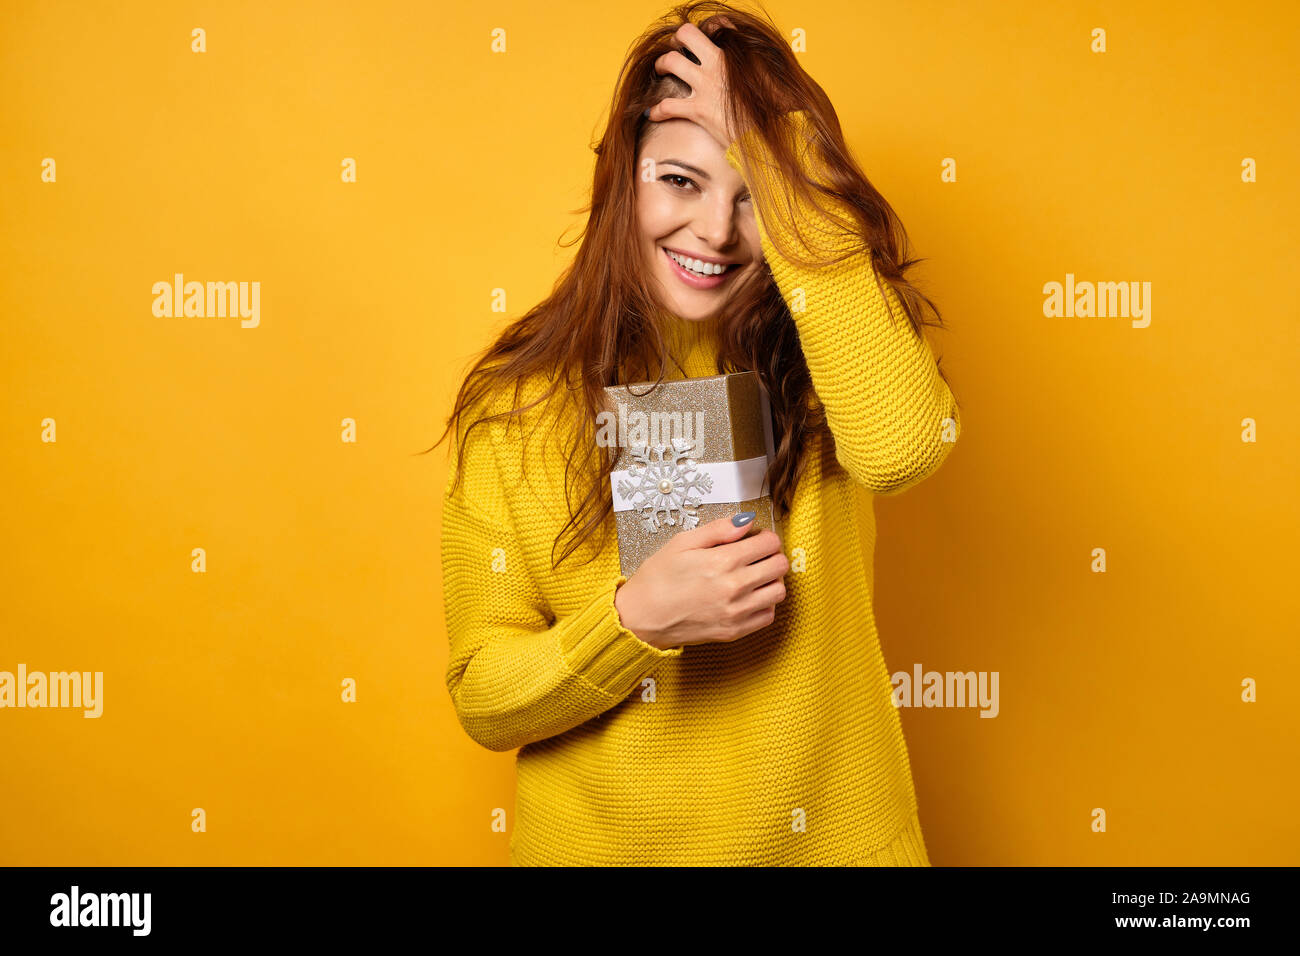 The brunette stands on a yellow background in a yellow sweater, presses a gift box to herself, smiling and ruffling hair with hand Stock Photo